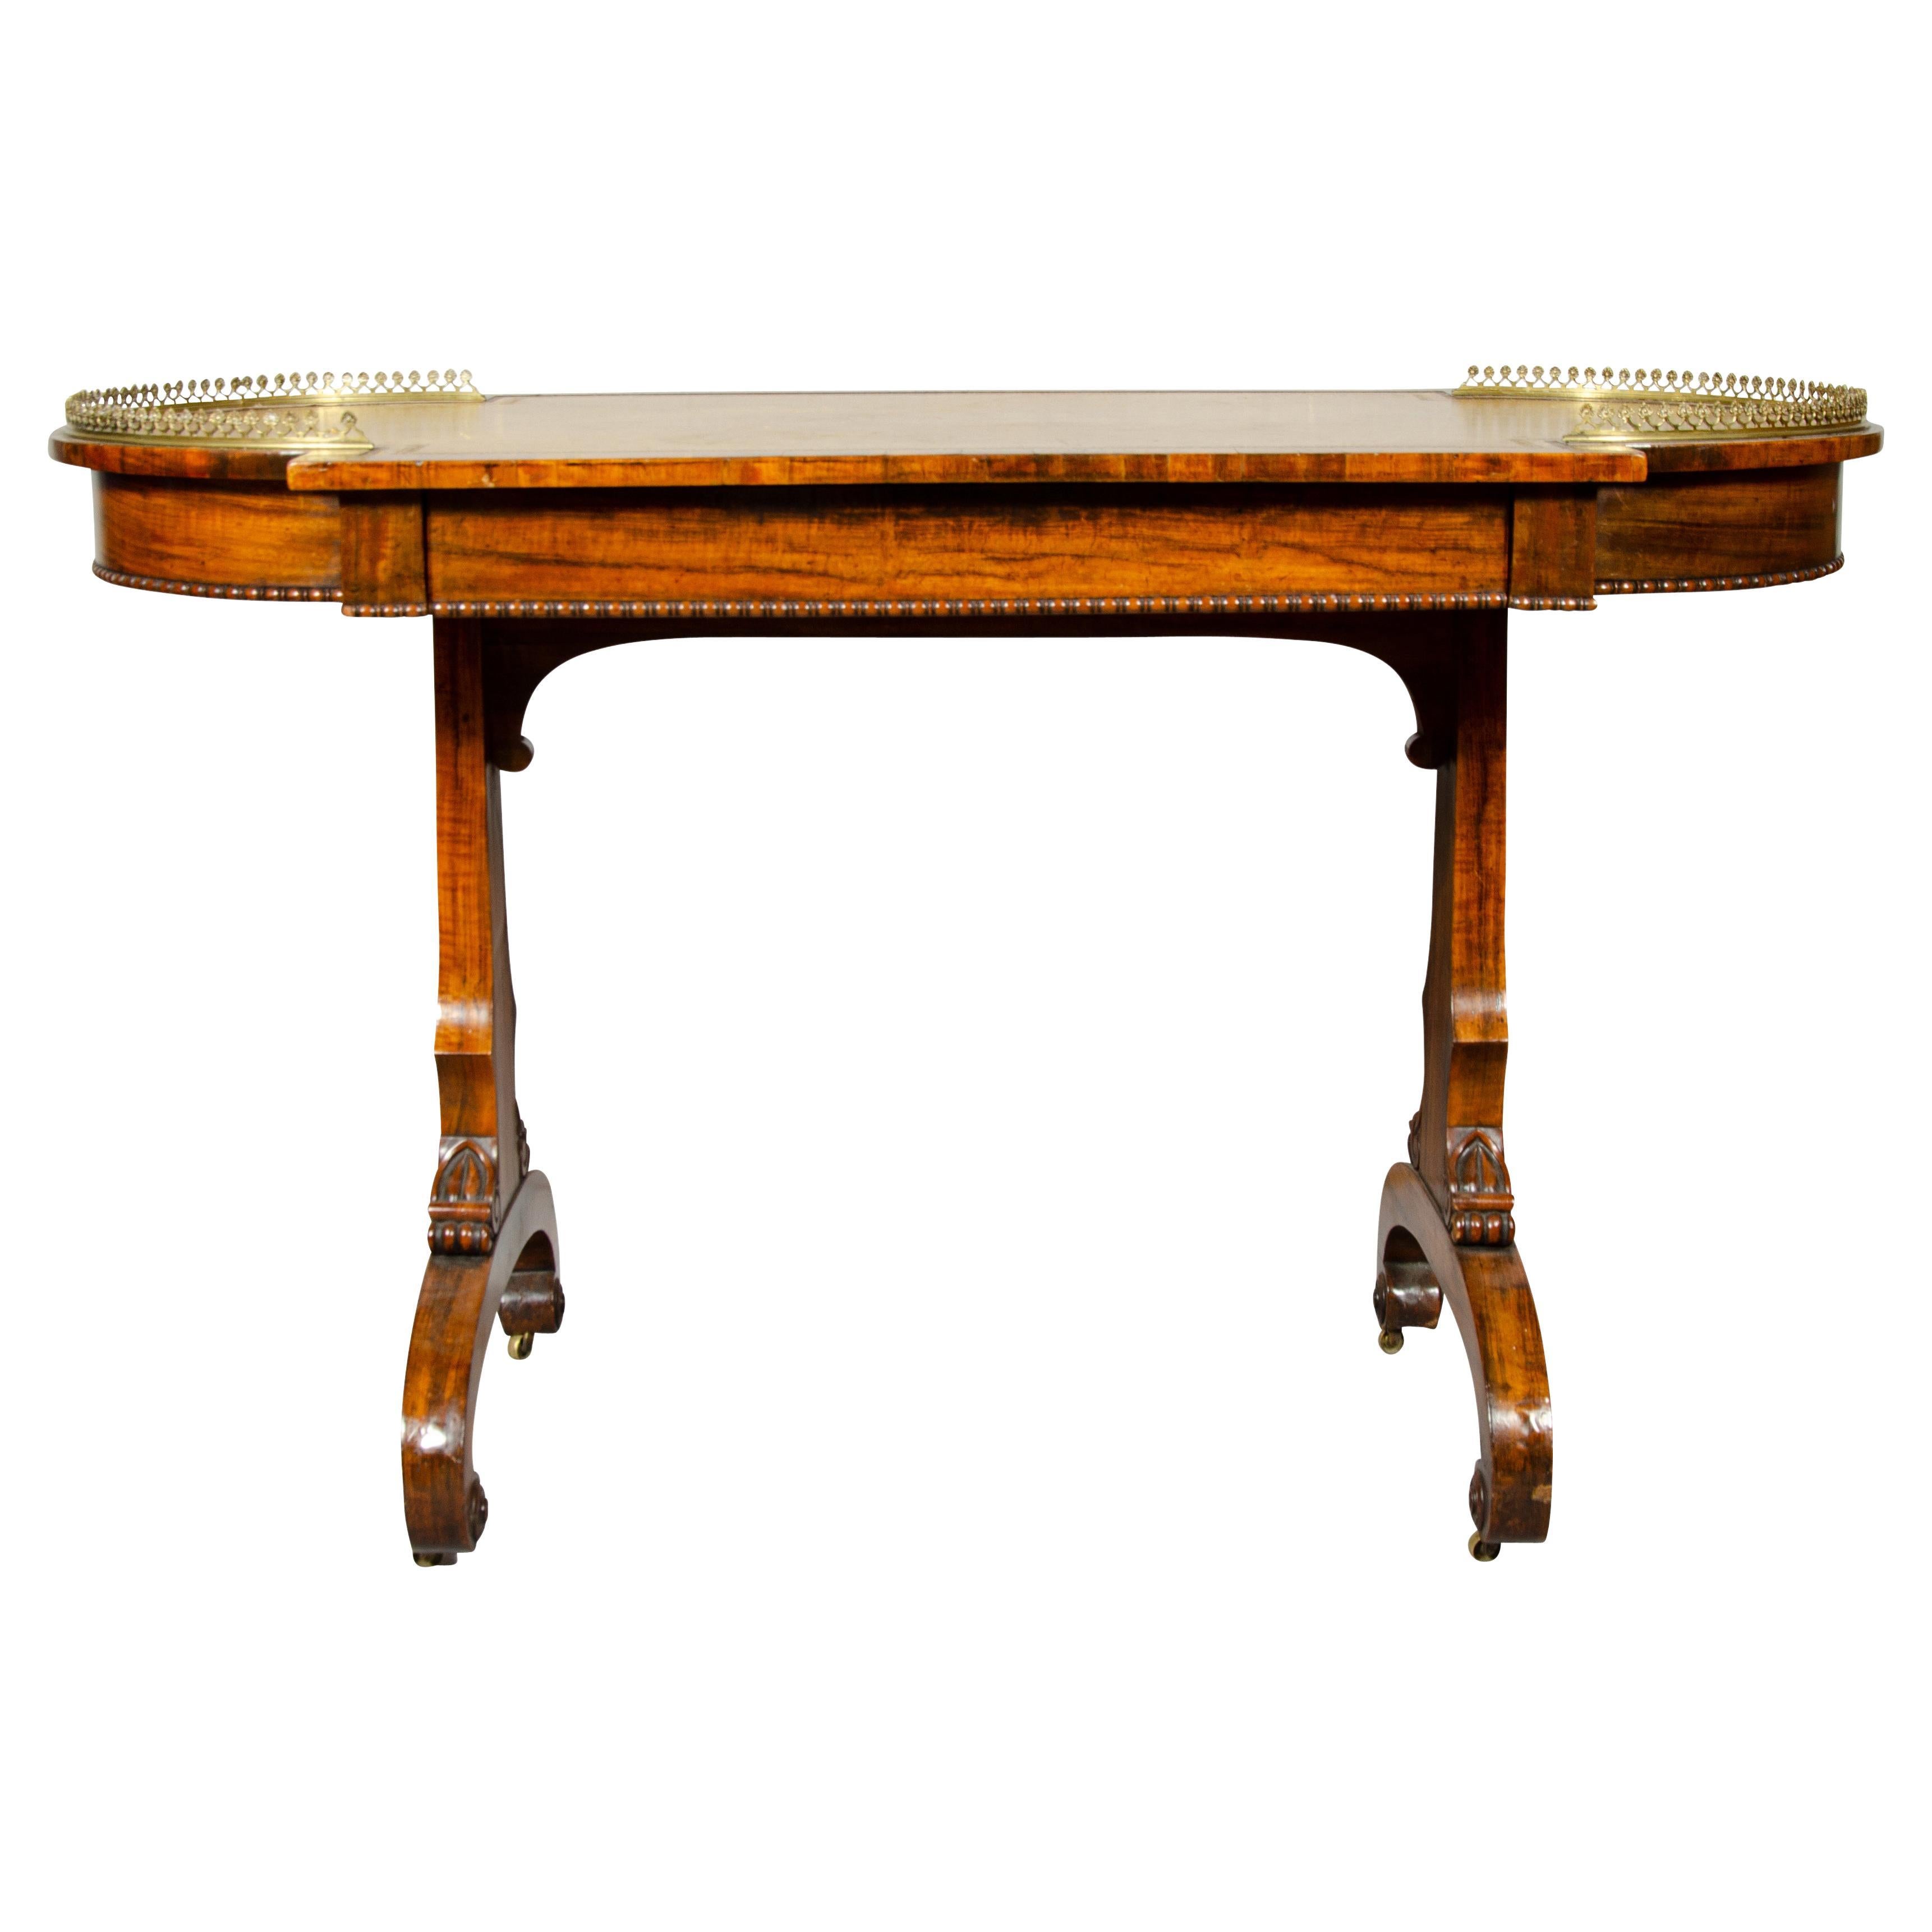 With rectangular top with rounded ends, brass gallery and inset tooled leather top, frieze drawer, beaded base of frieze, trestle base, scroll carved legs.